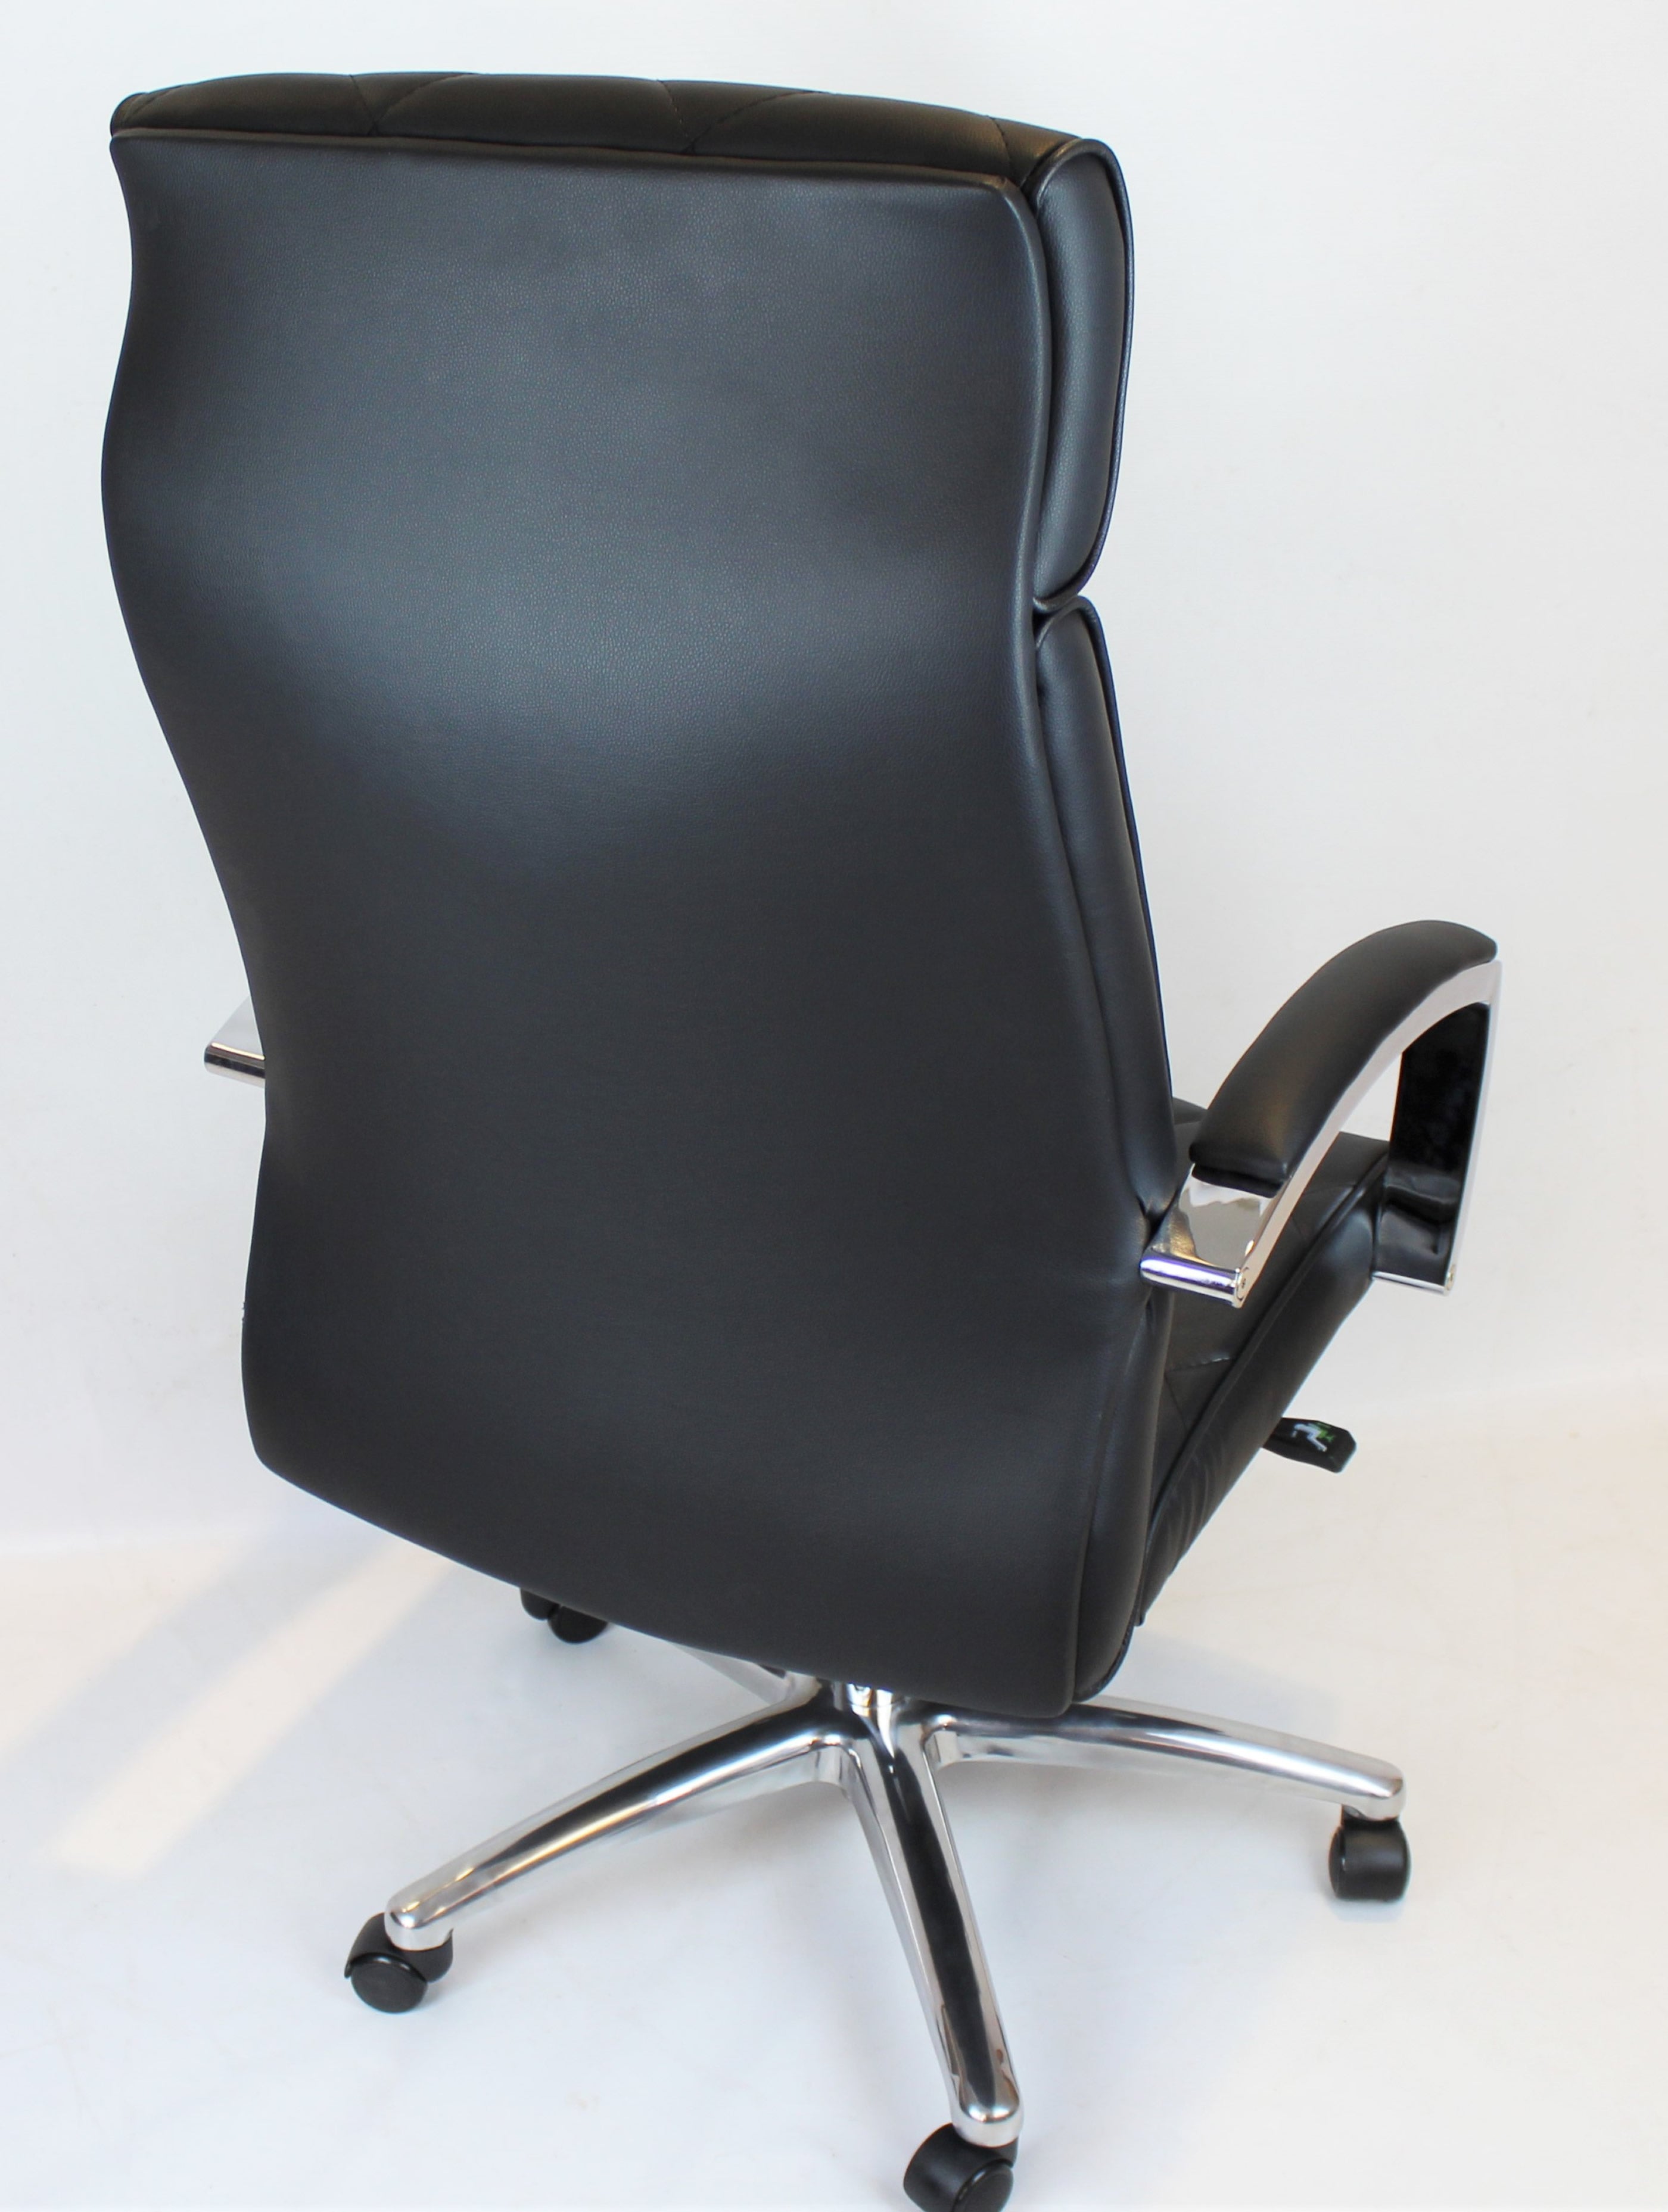 Black Leather Executive Office Chair - ZM-A217